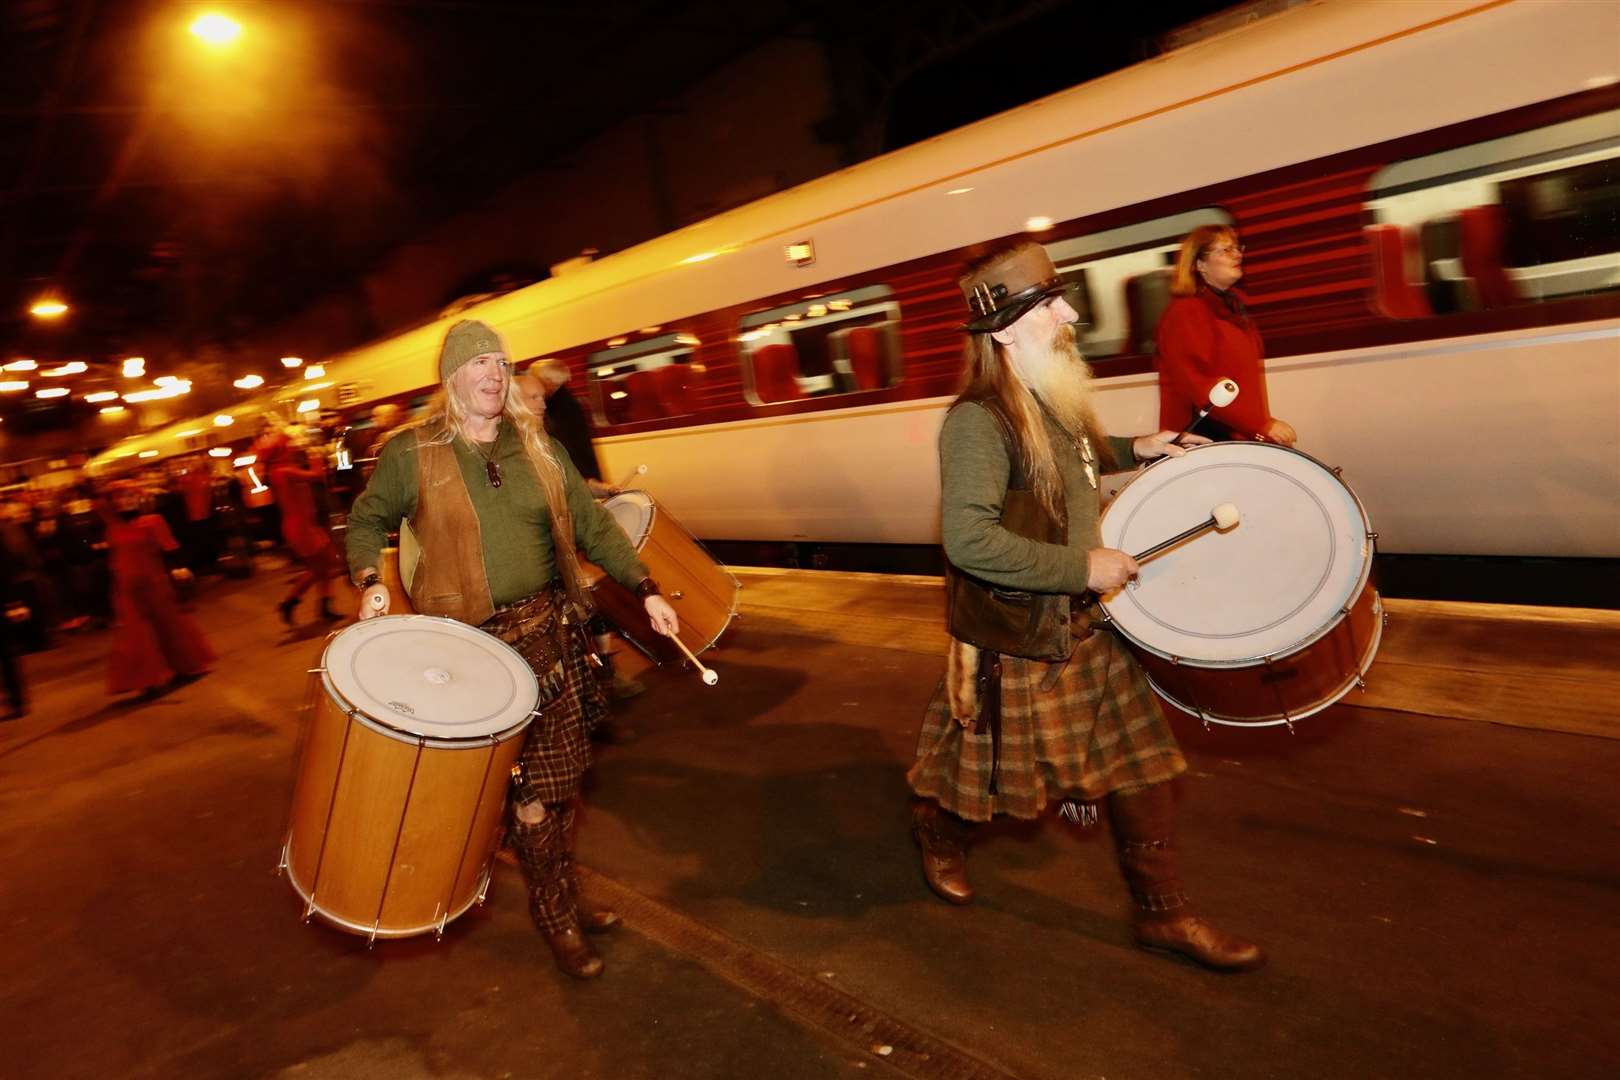 The first service was launched to teh sound of pipes and drums. Please credit: LNER/CREST PHOTOGRAPHY